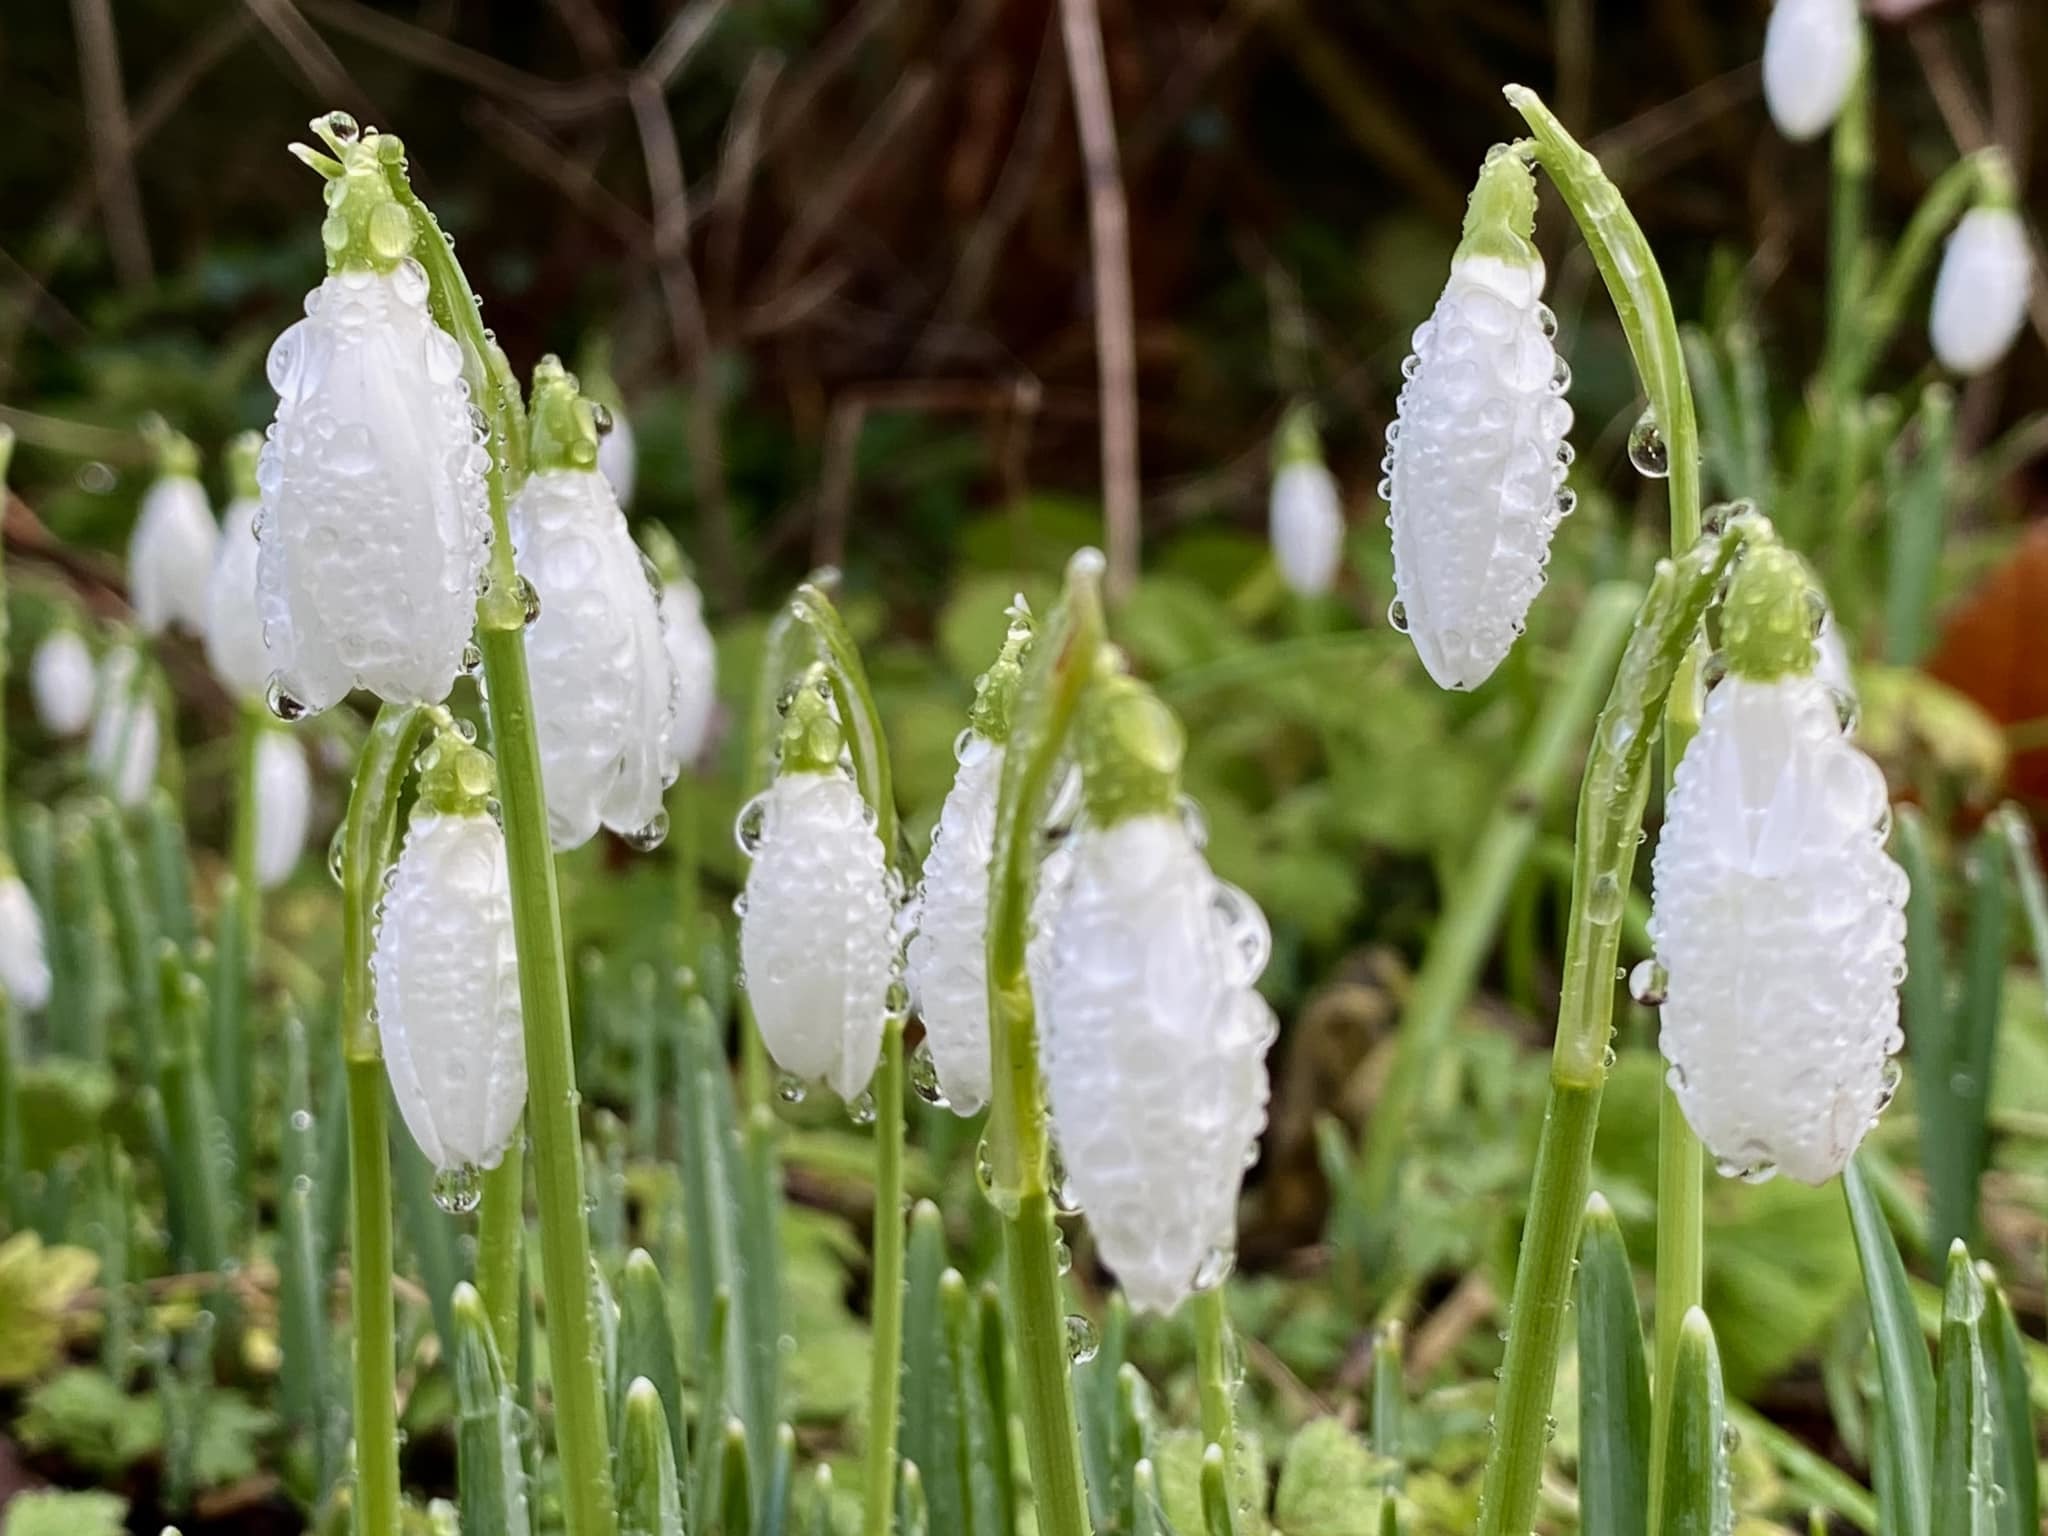 Raindrops and snowdrops by Adele Rugen